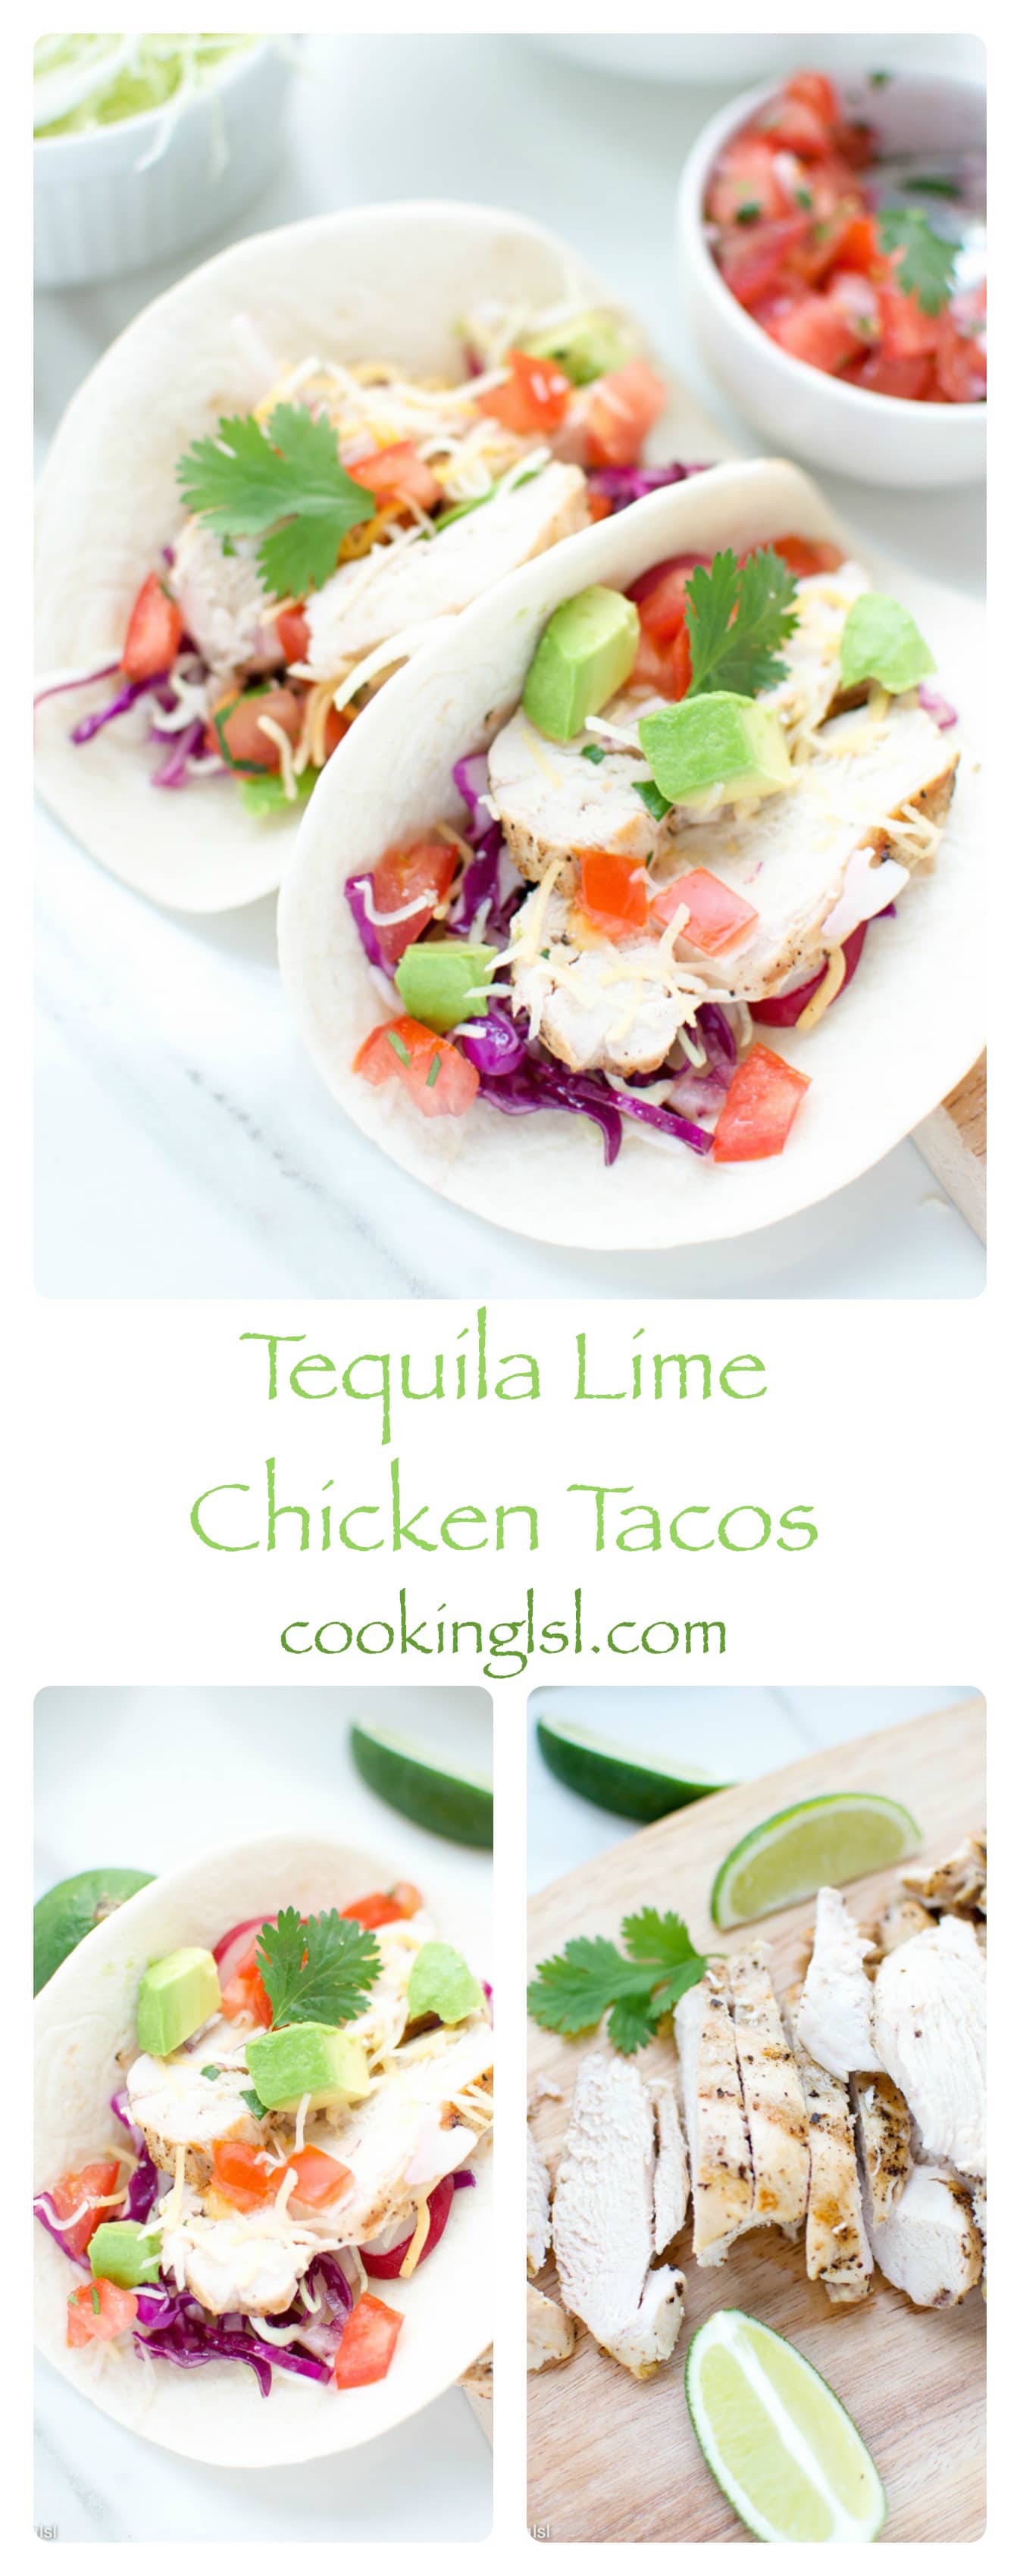 tequila-lime-marinated-chicken-tacos-recipe